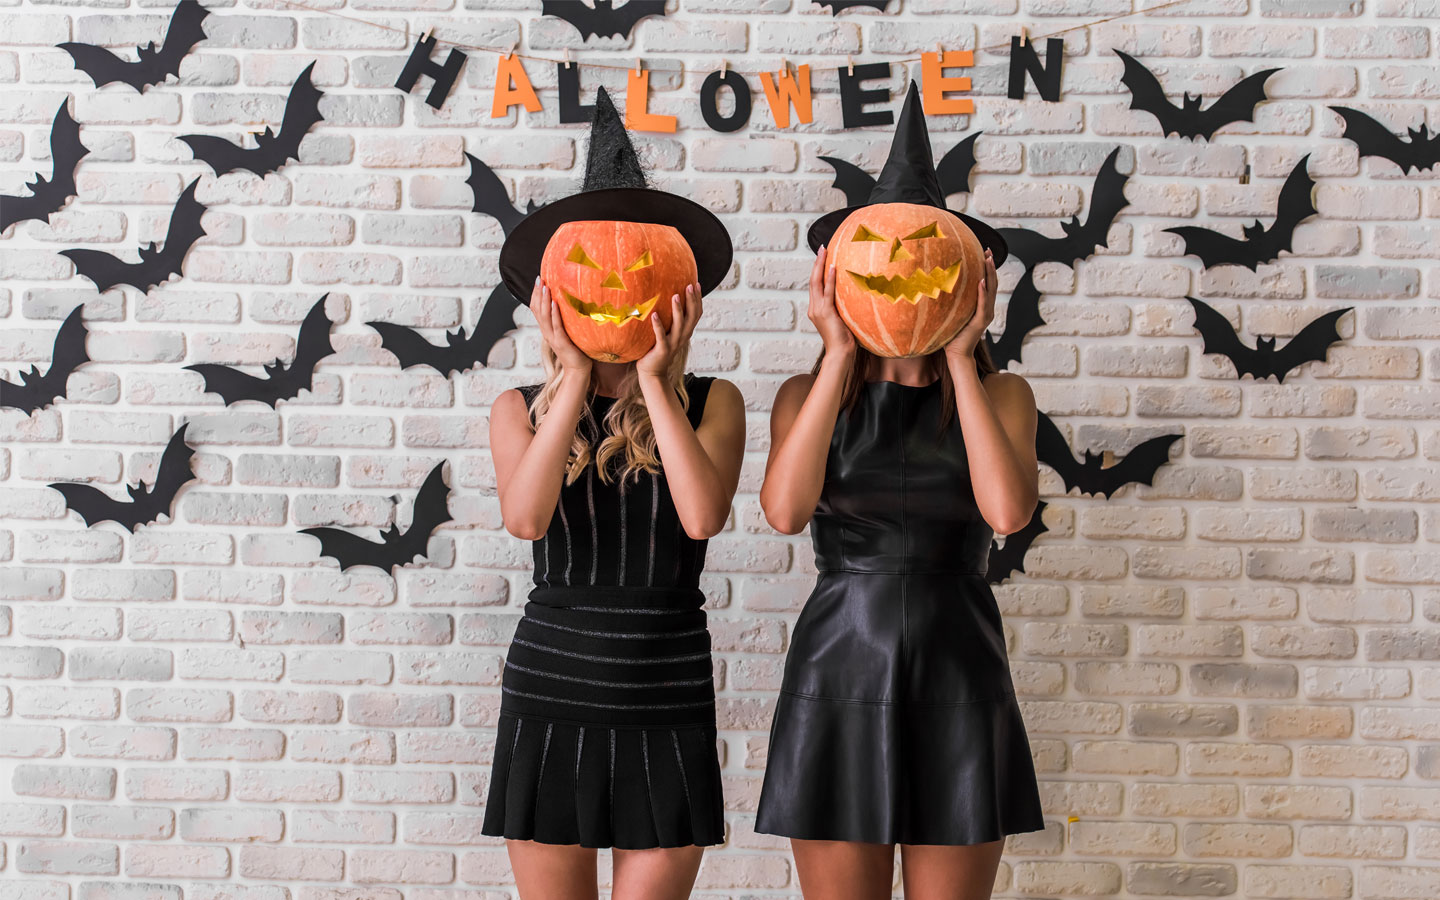 What Does Entrepreneur’s Choice of Halloween Costume Reveal?